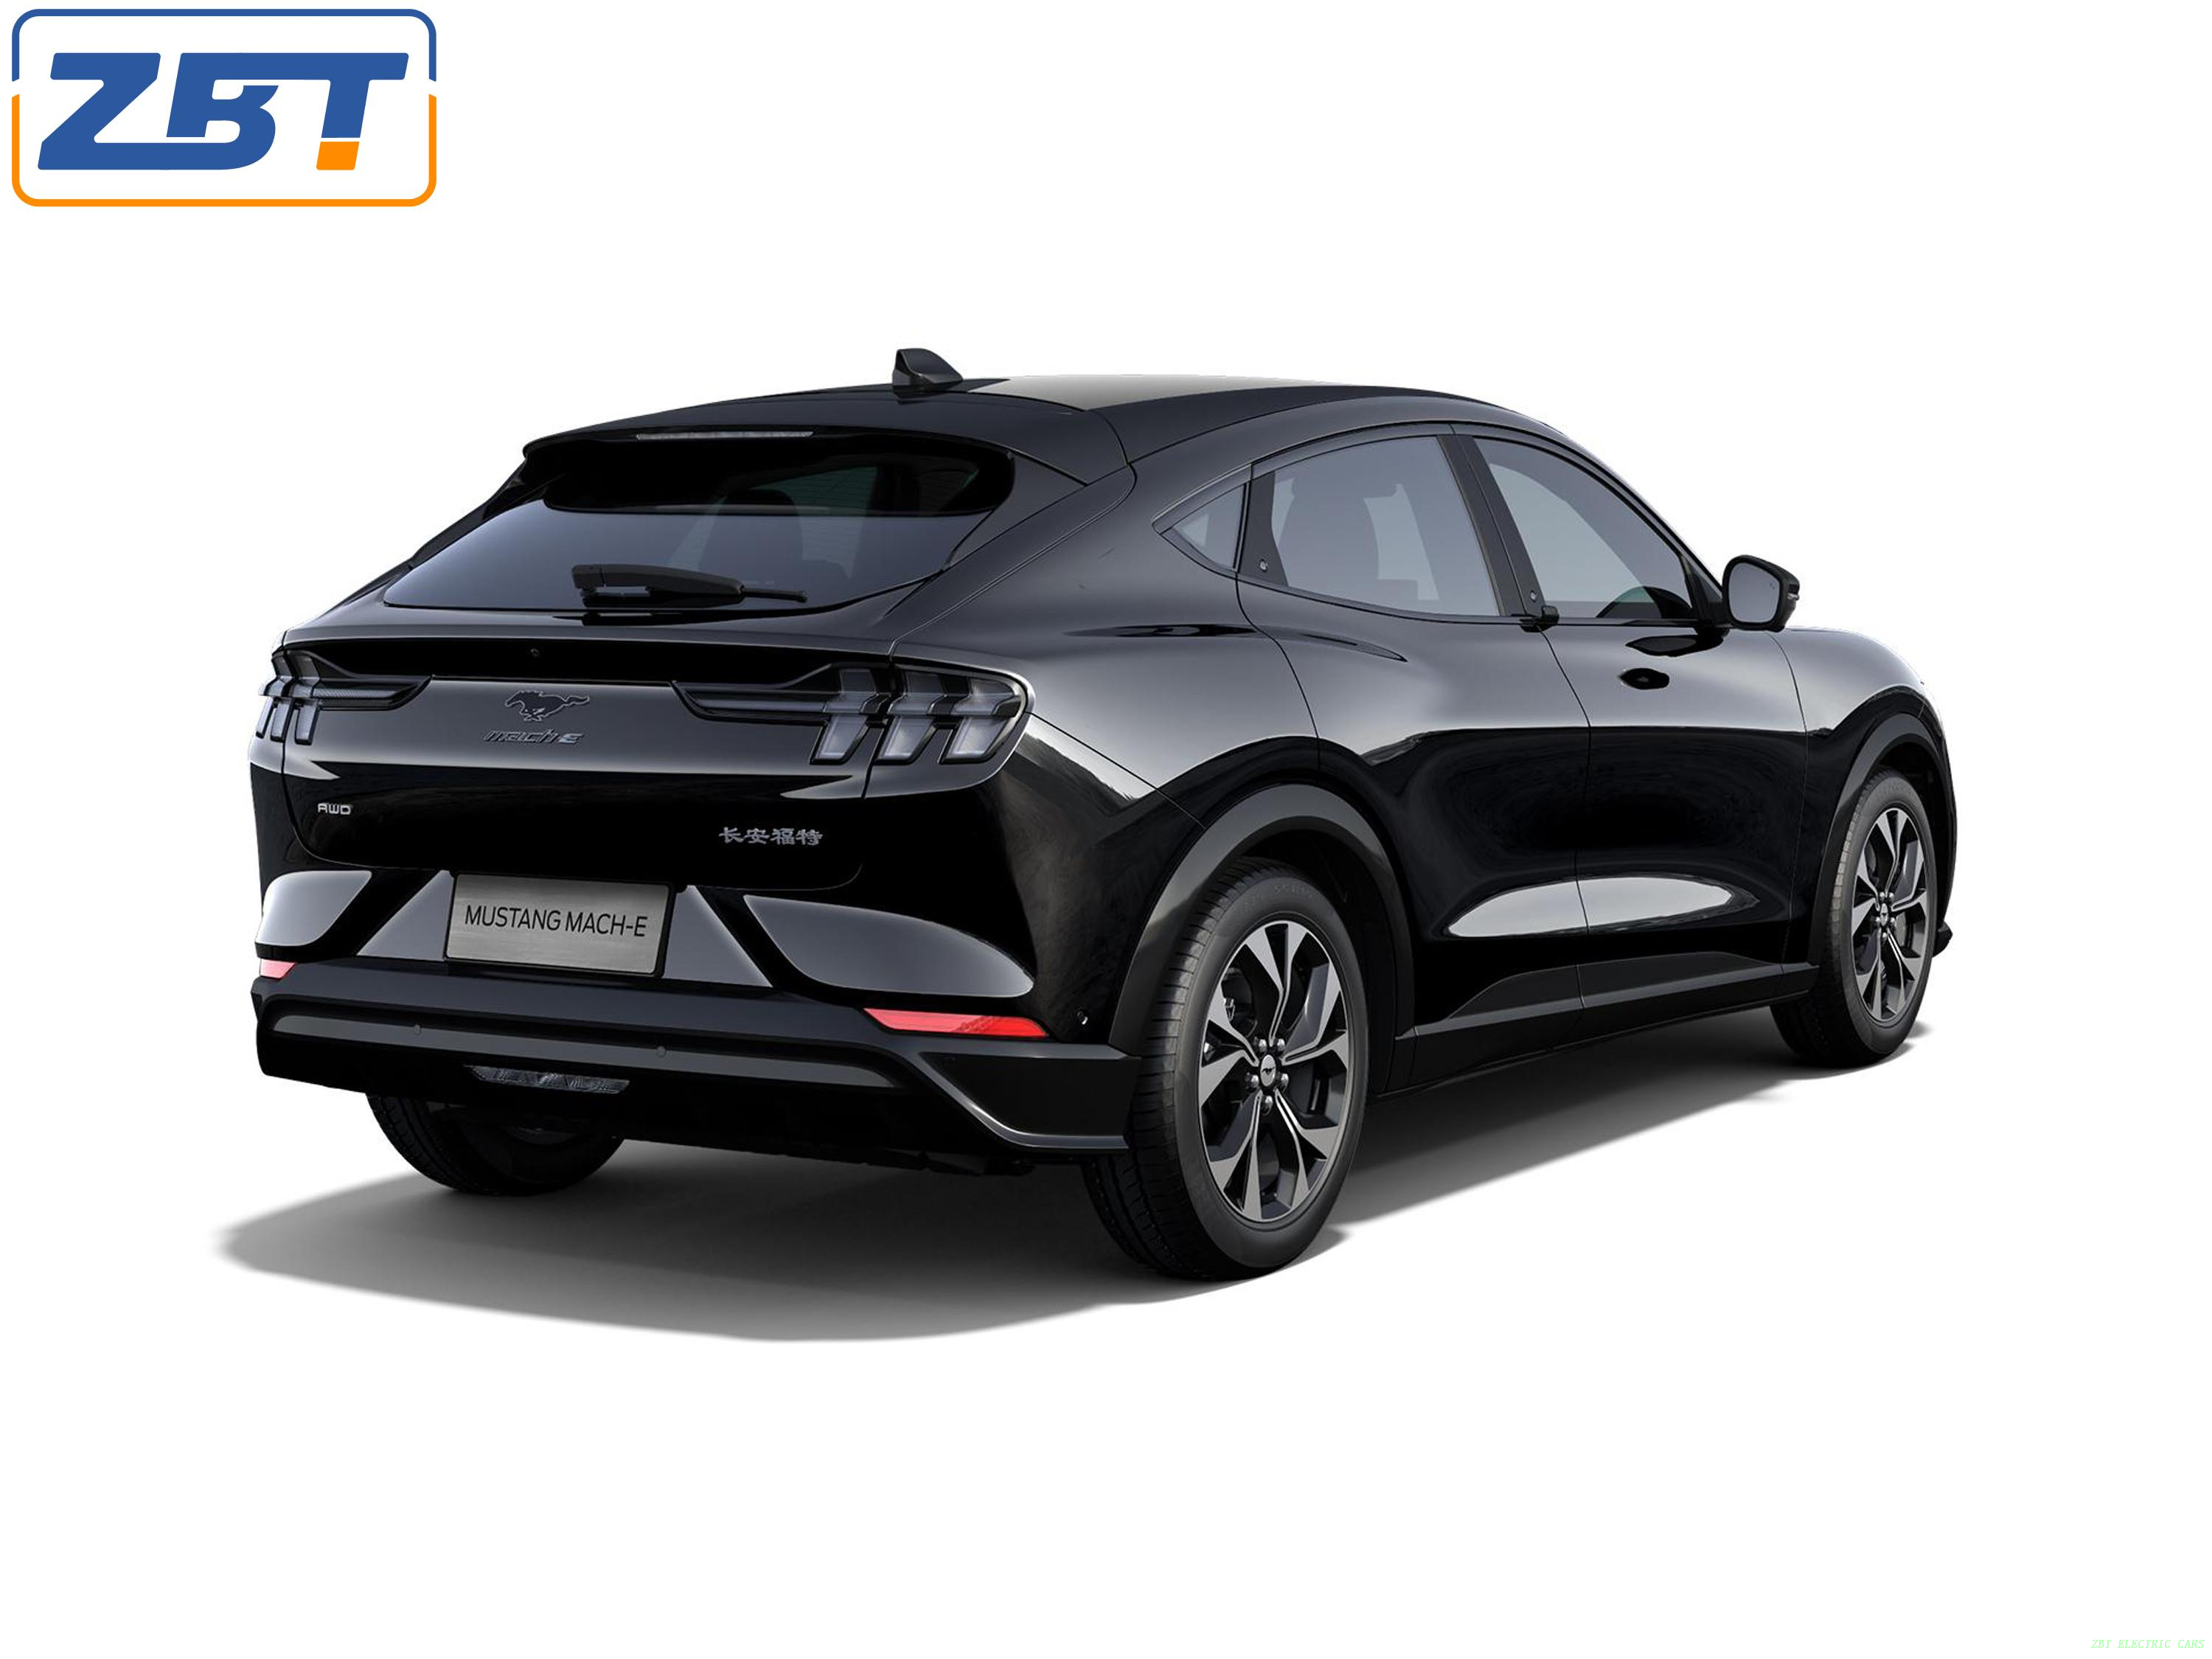 Mustang Mach-e Electric Motor 500km 600km Long Range Luxury 2wd 4wd Super Ev Suv Intelligent Auto Car with Fast Charge